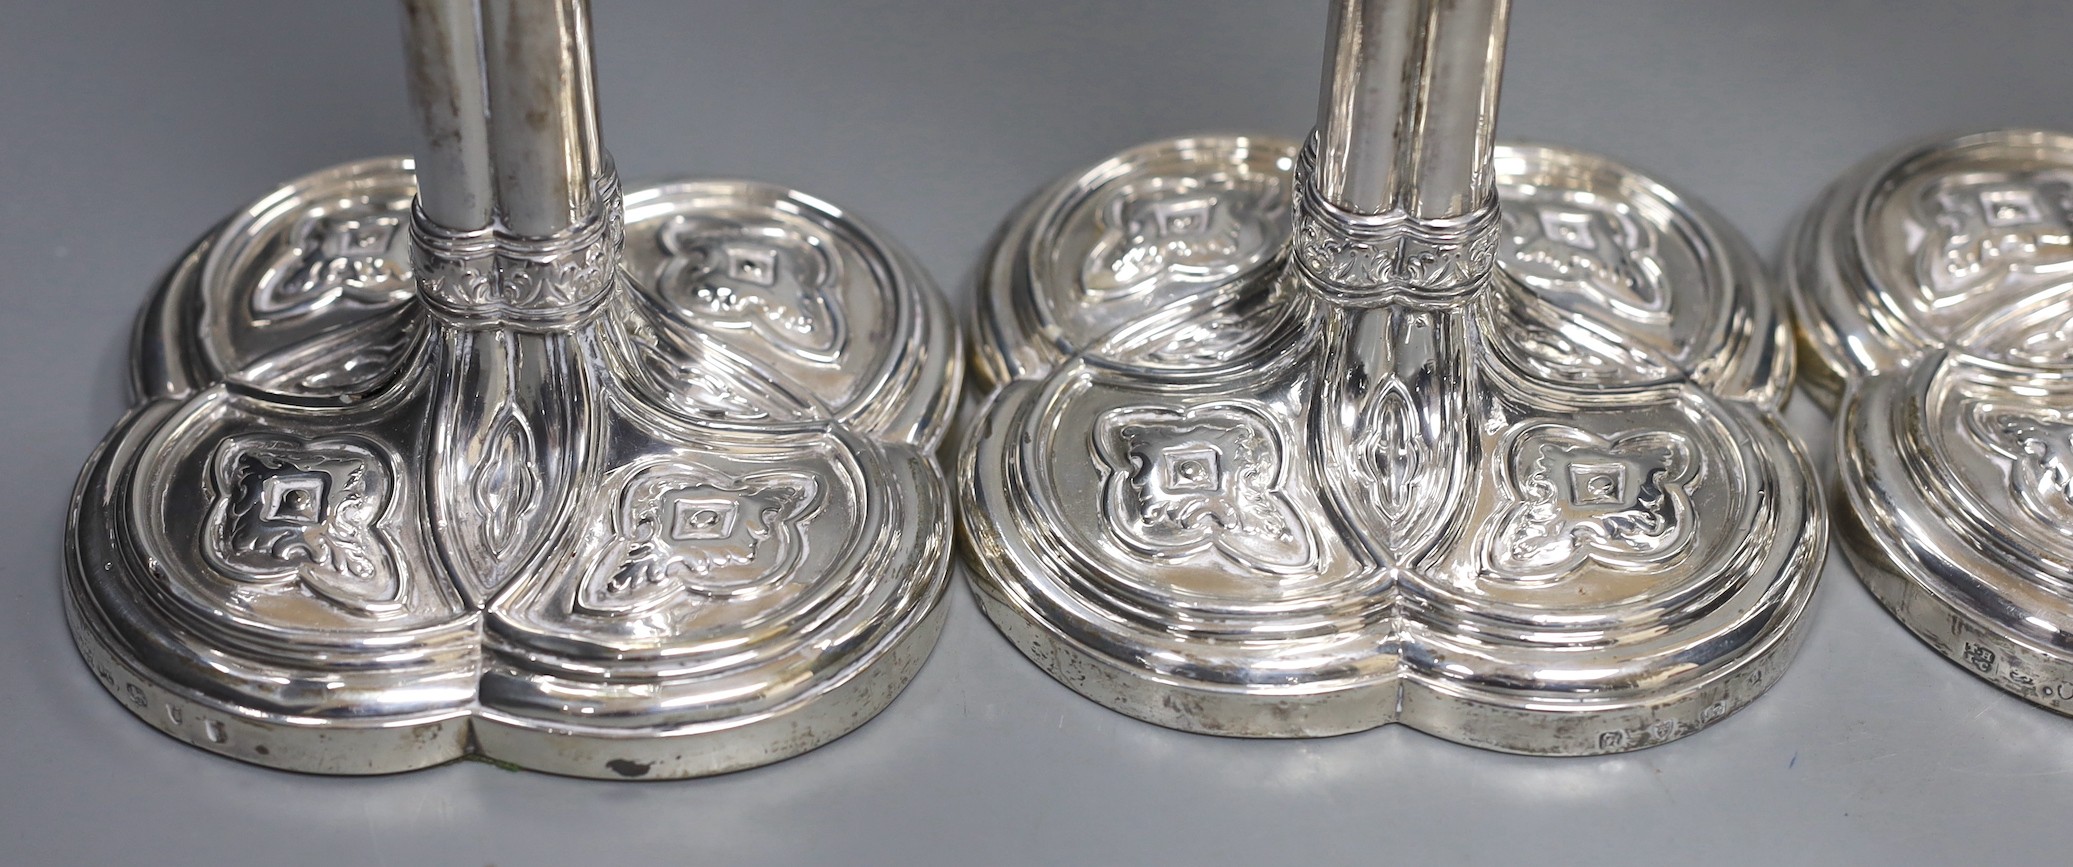 A set of four early George III silver gothic cluster column candlesticks, on cusped quatrefoil bases, by Hannam or Hammond & Carter, London, 1763, 28.8cm, weighted (holes).